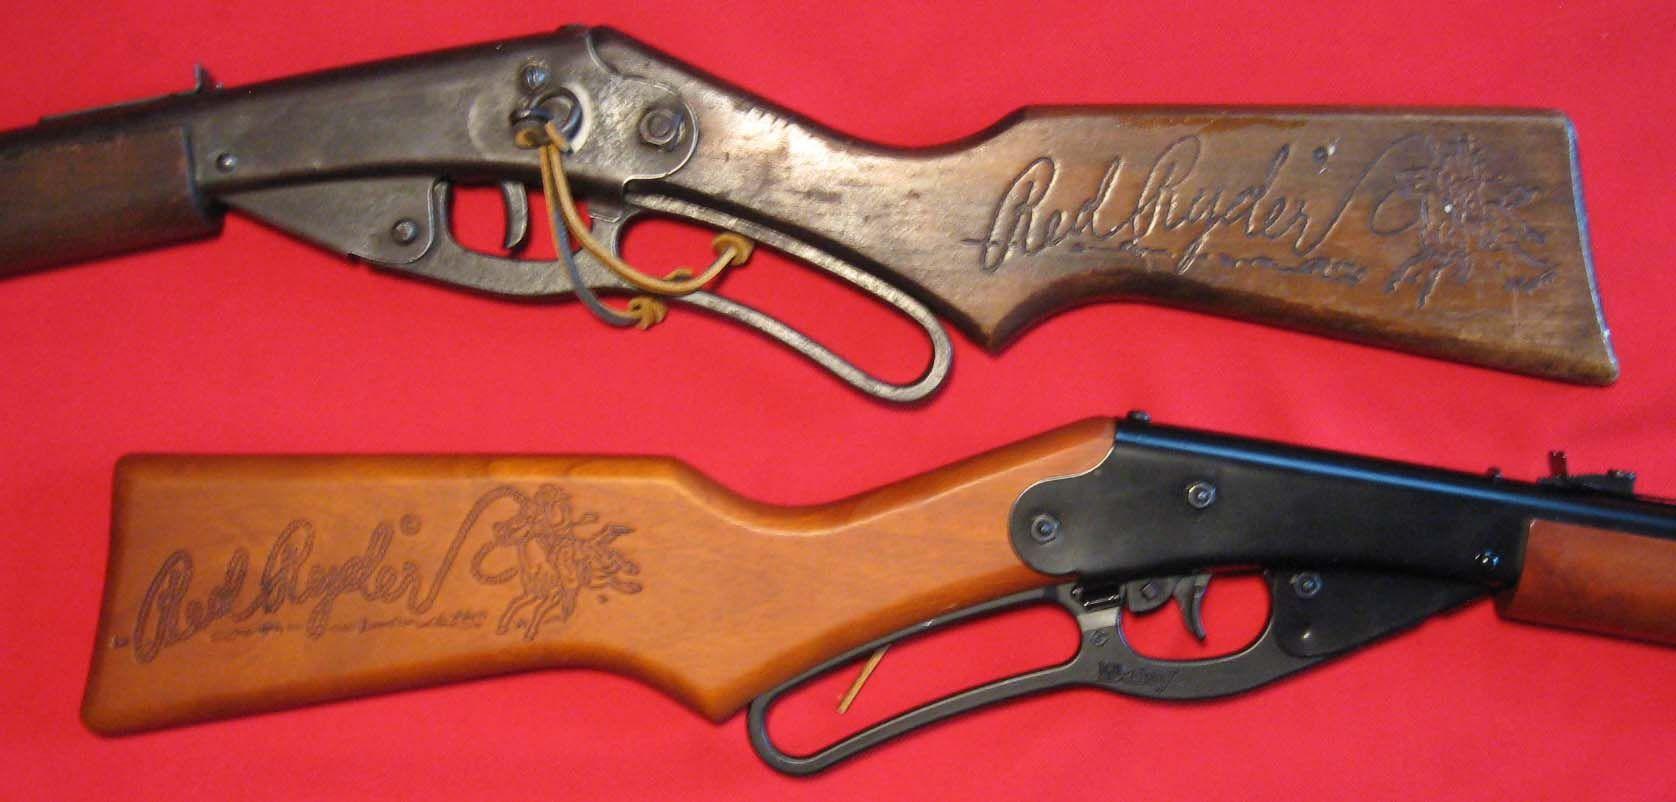 Red Rider BB Logo - The Daisy Red Ryder Carbine, Then, and Now | A Tale of Two Thirties